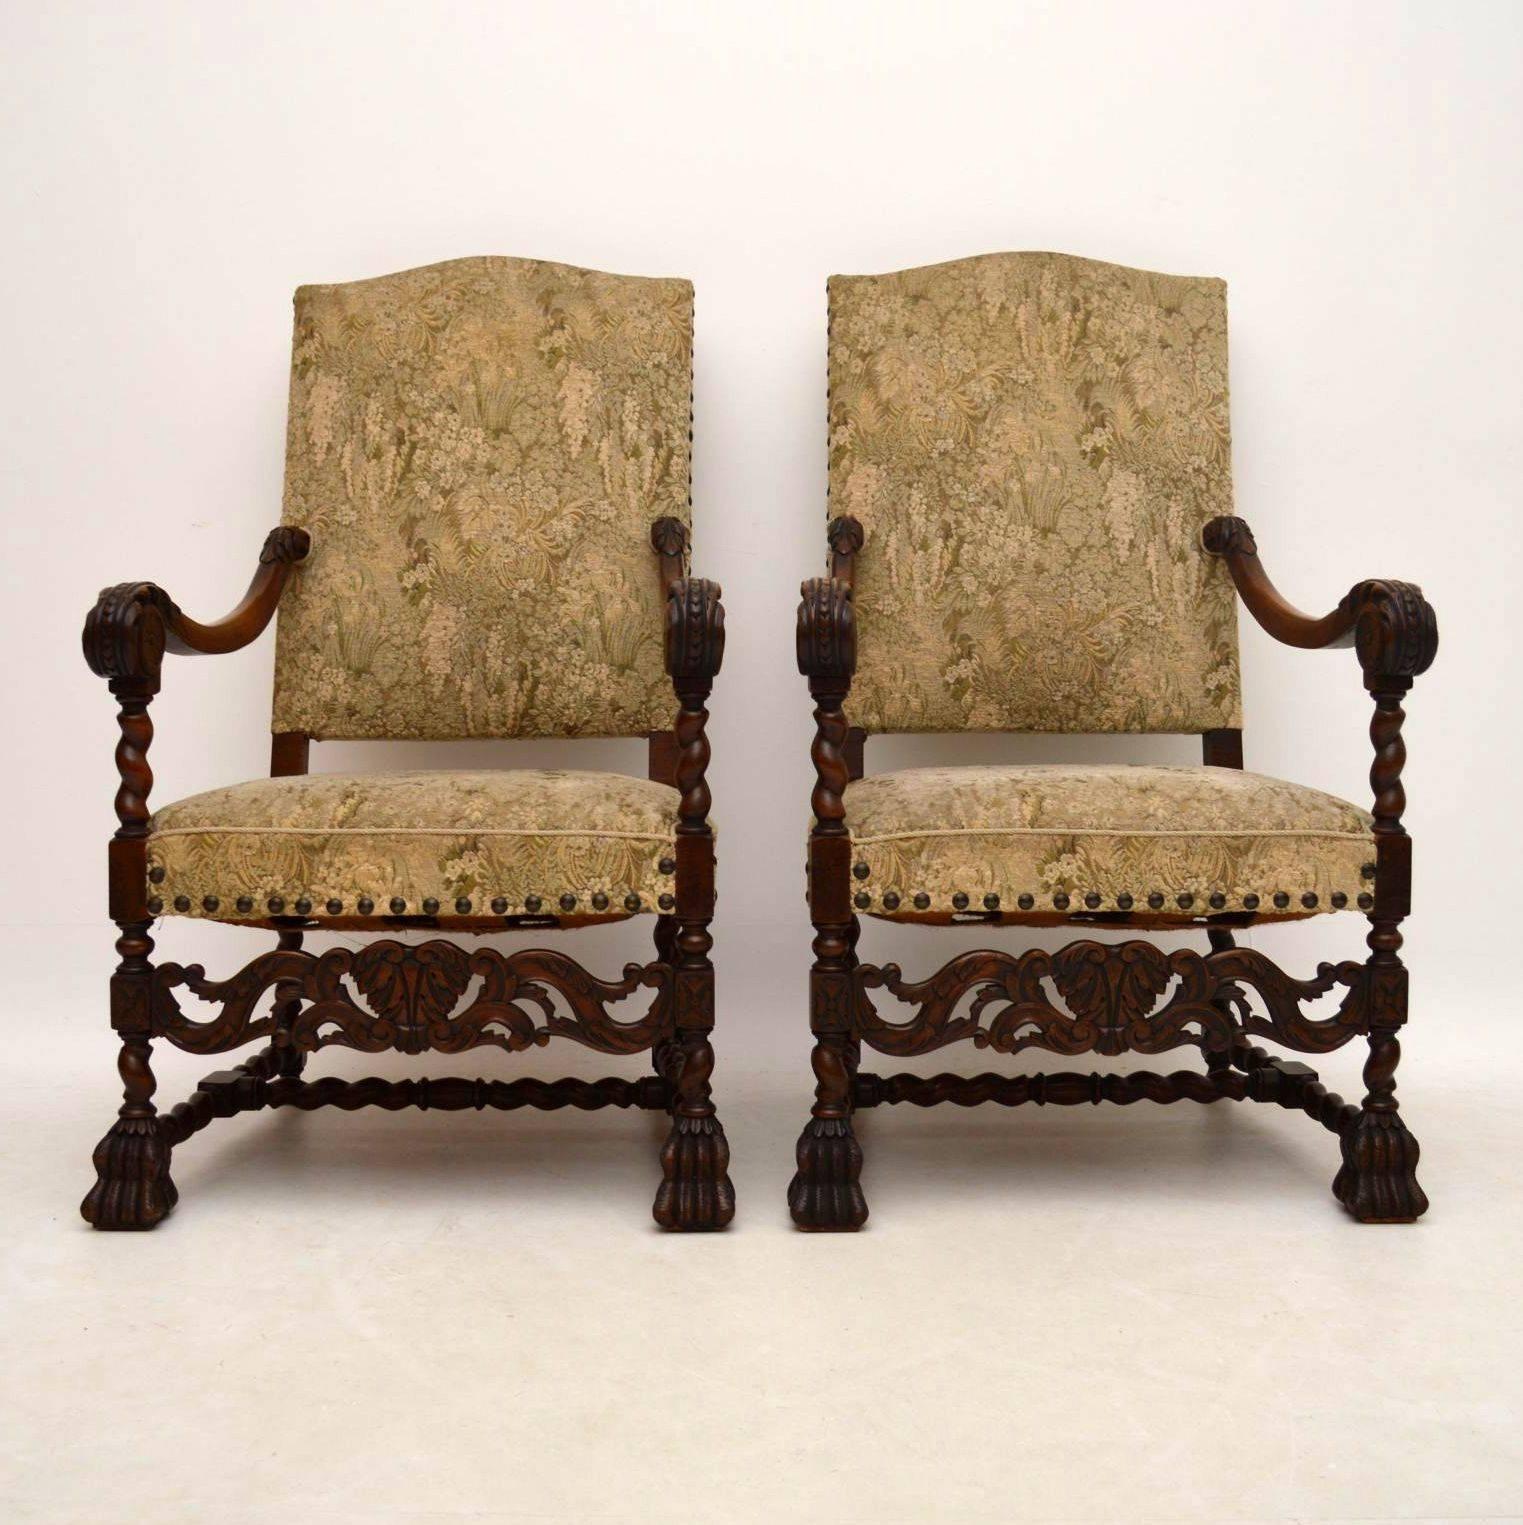 Very impressive large pair of antique Swedish Carolean style upholstered armchairs in good condition and dating from around the 1890s period. They have high backs and the upholstery is the original cut velvet which is still in good condition. These